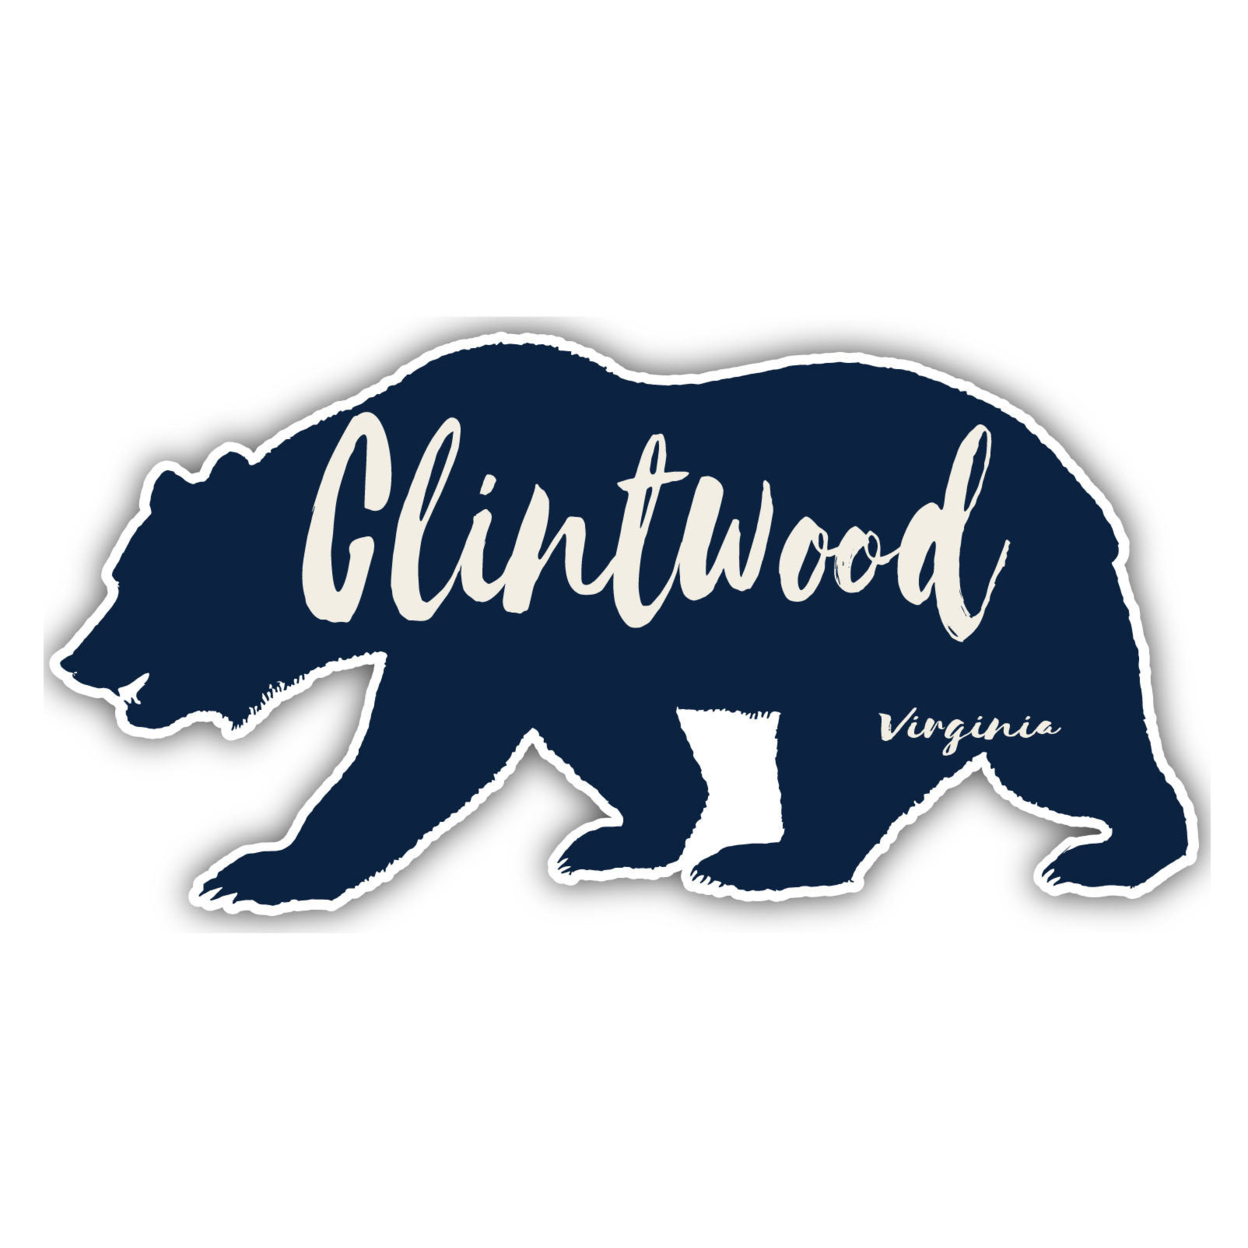 Clintwood Virginia Souvenir Decorative Stickers (Choose Theme And Size) - 4-Pack, 6-Inch, Bear